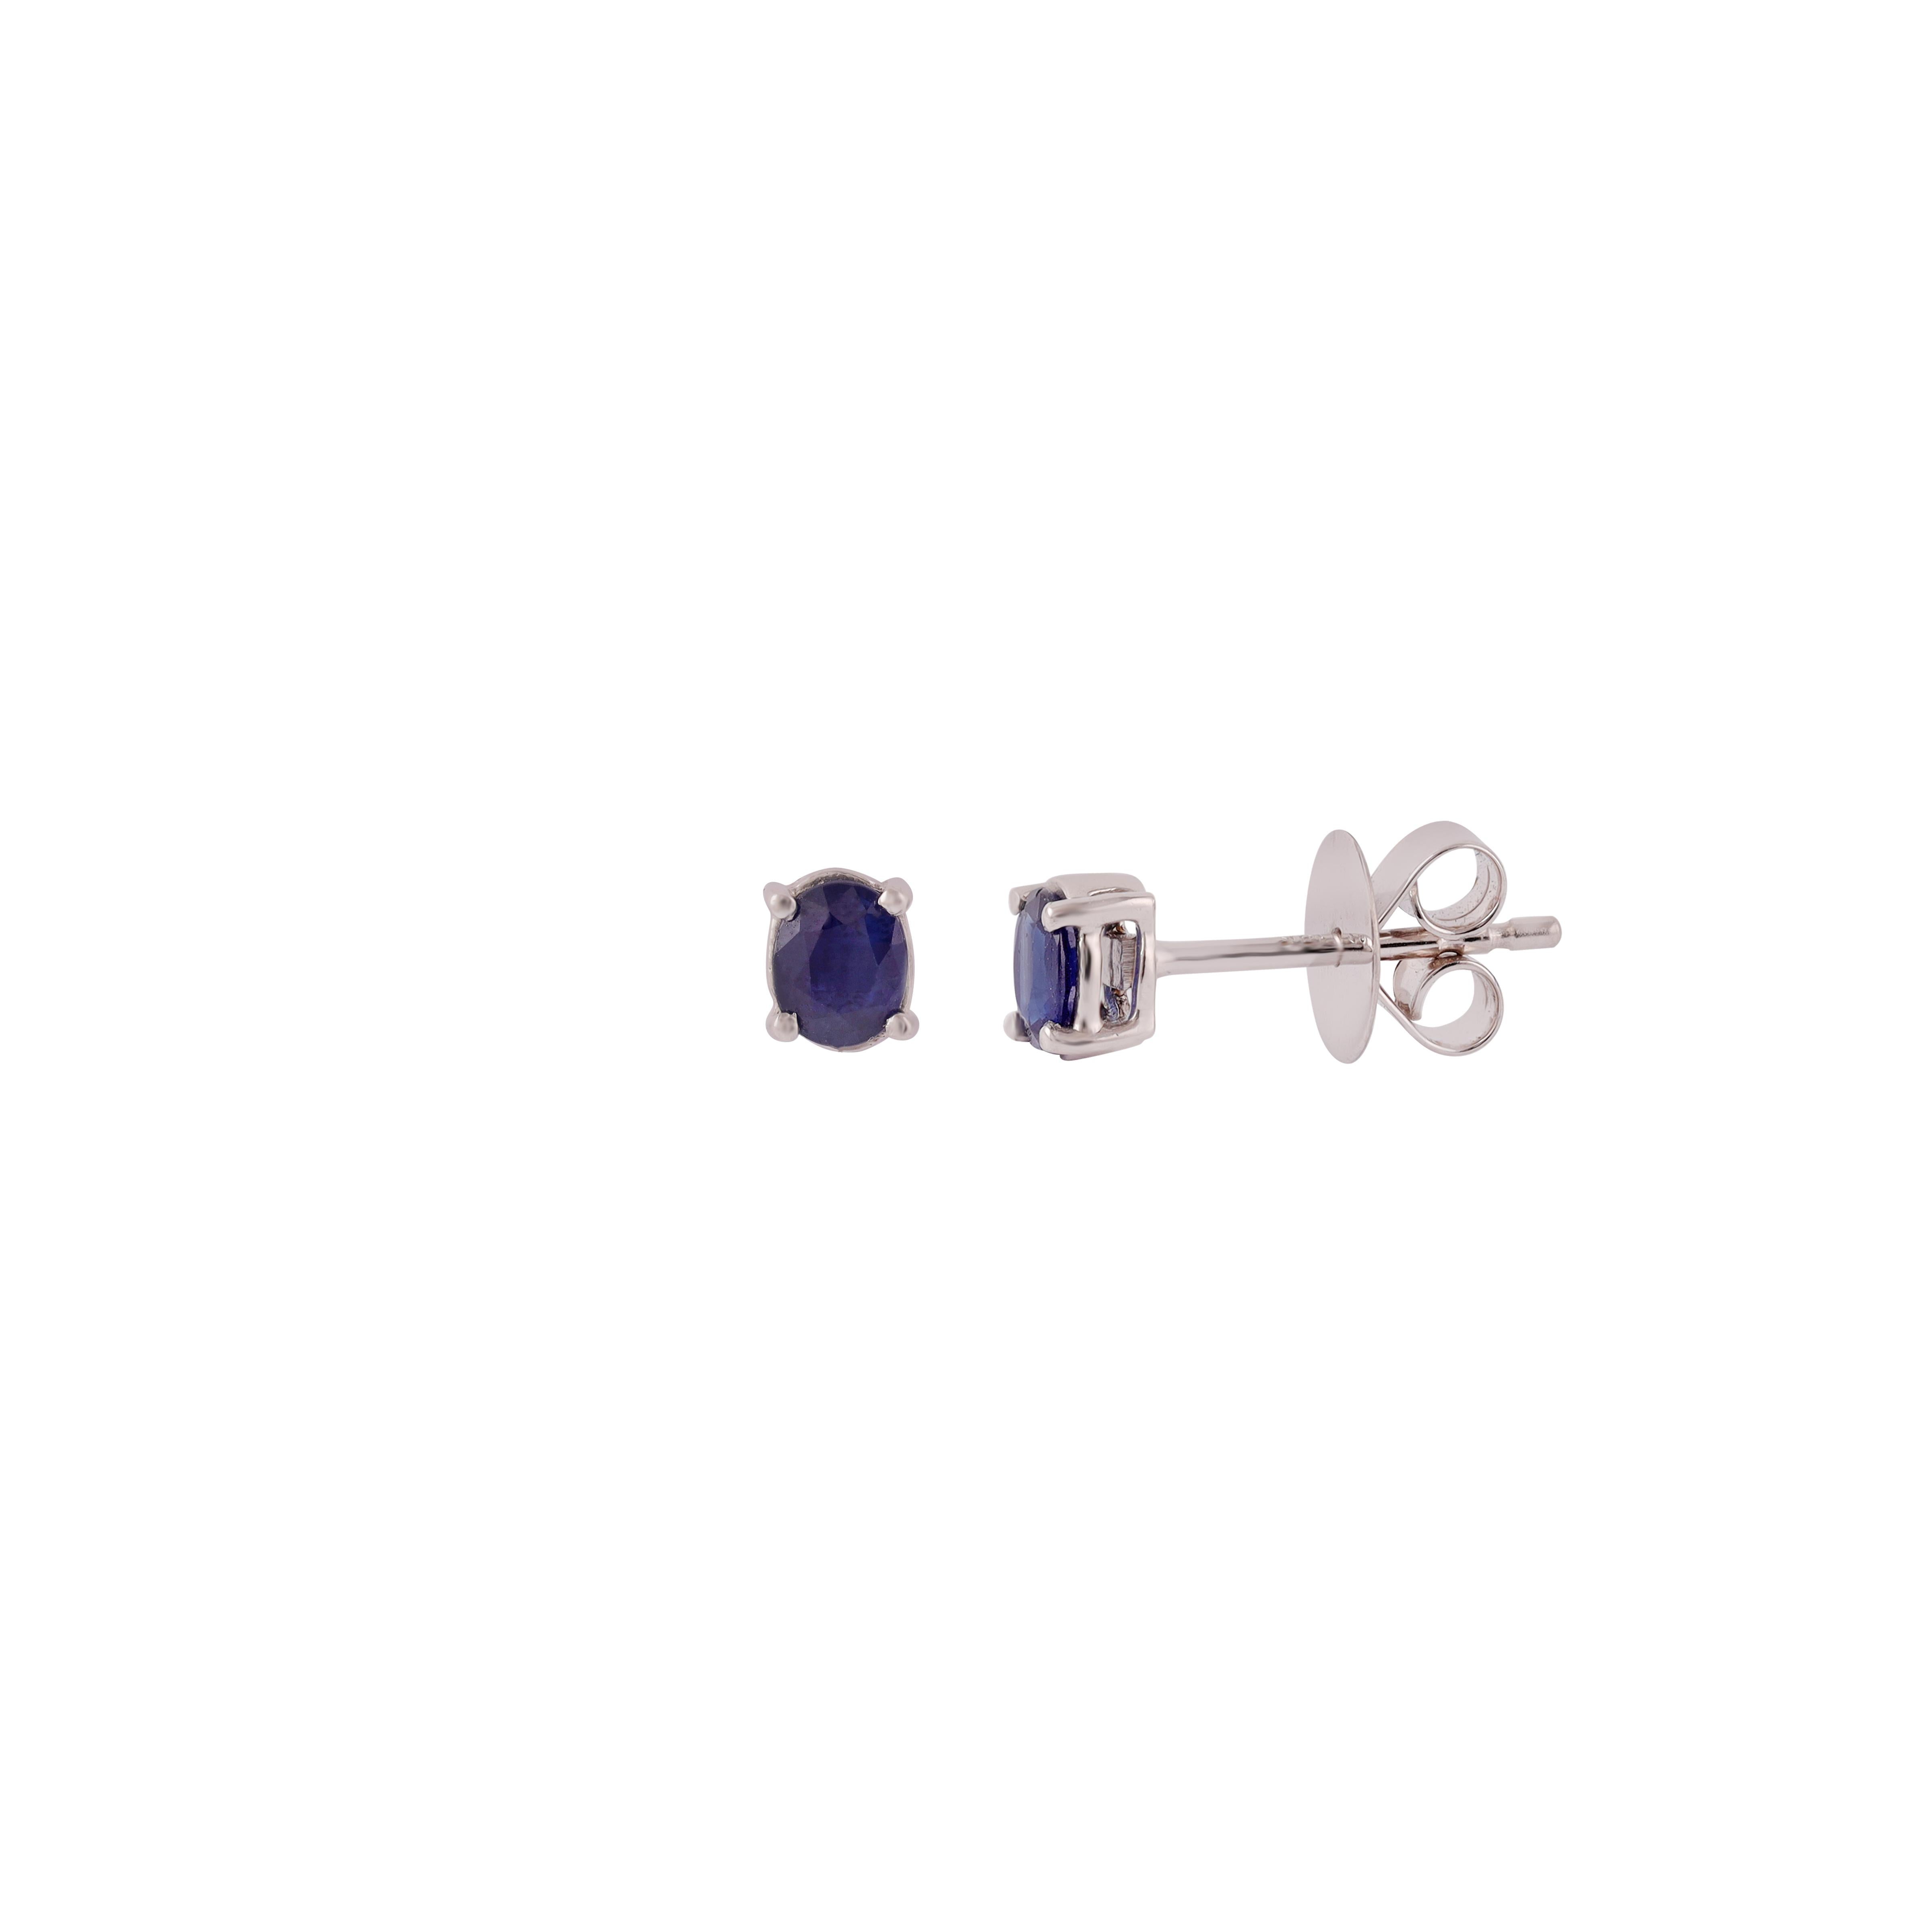 Contemporary 0.64 Carat Sapphire Stud Earrings in 18k White Gold For Sale